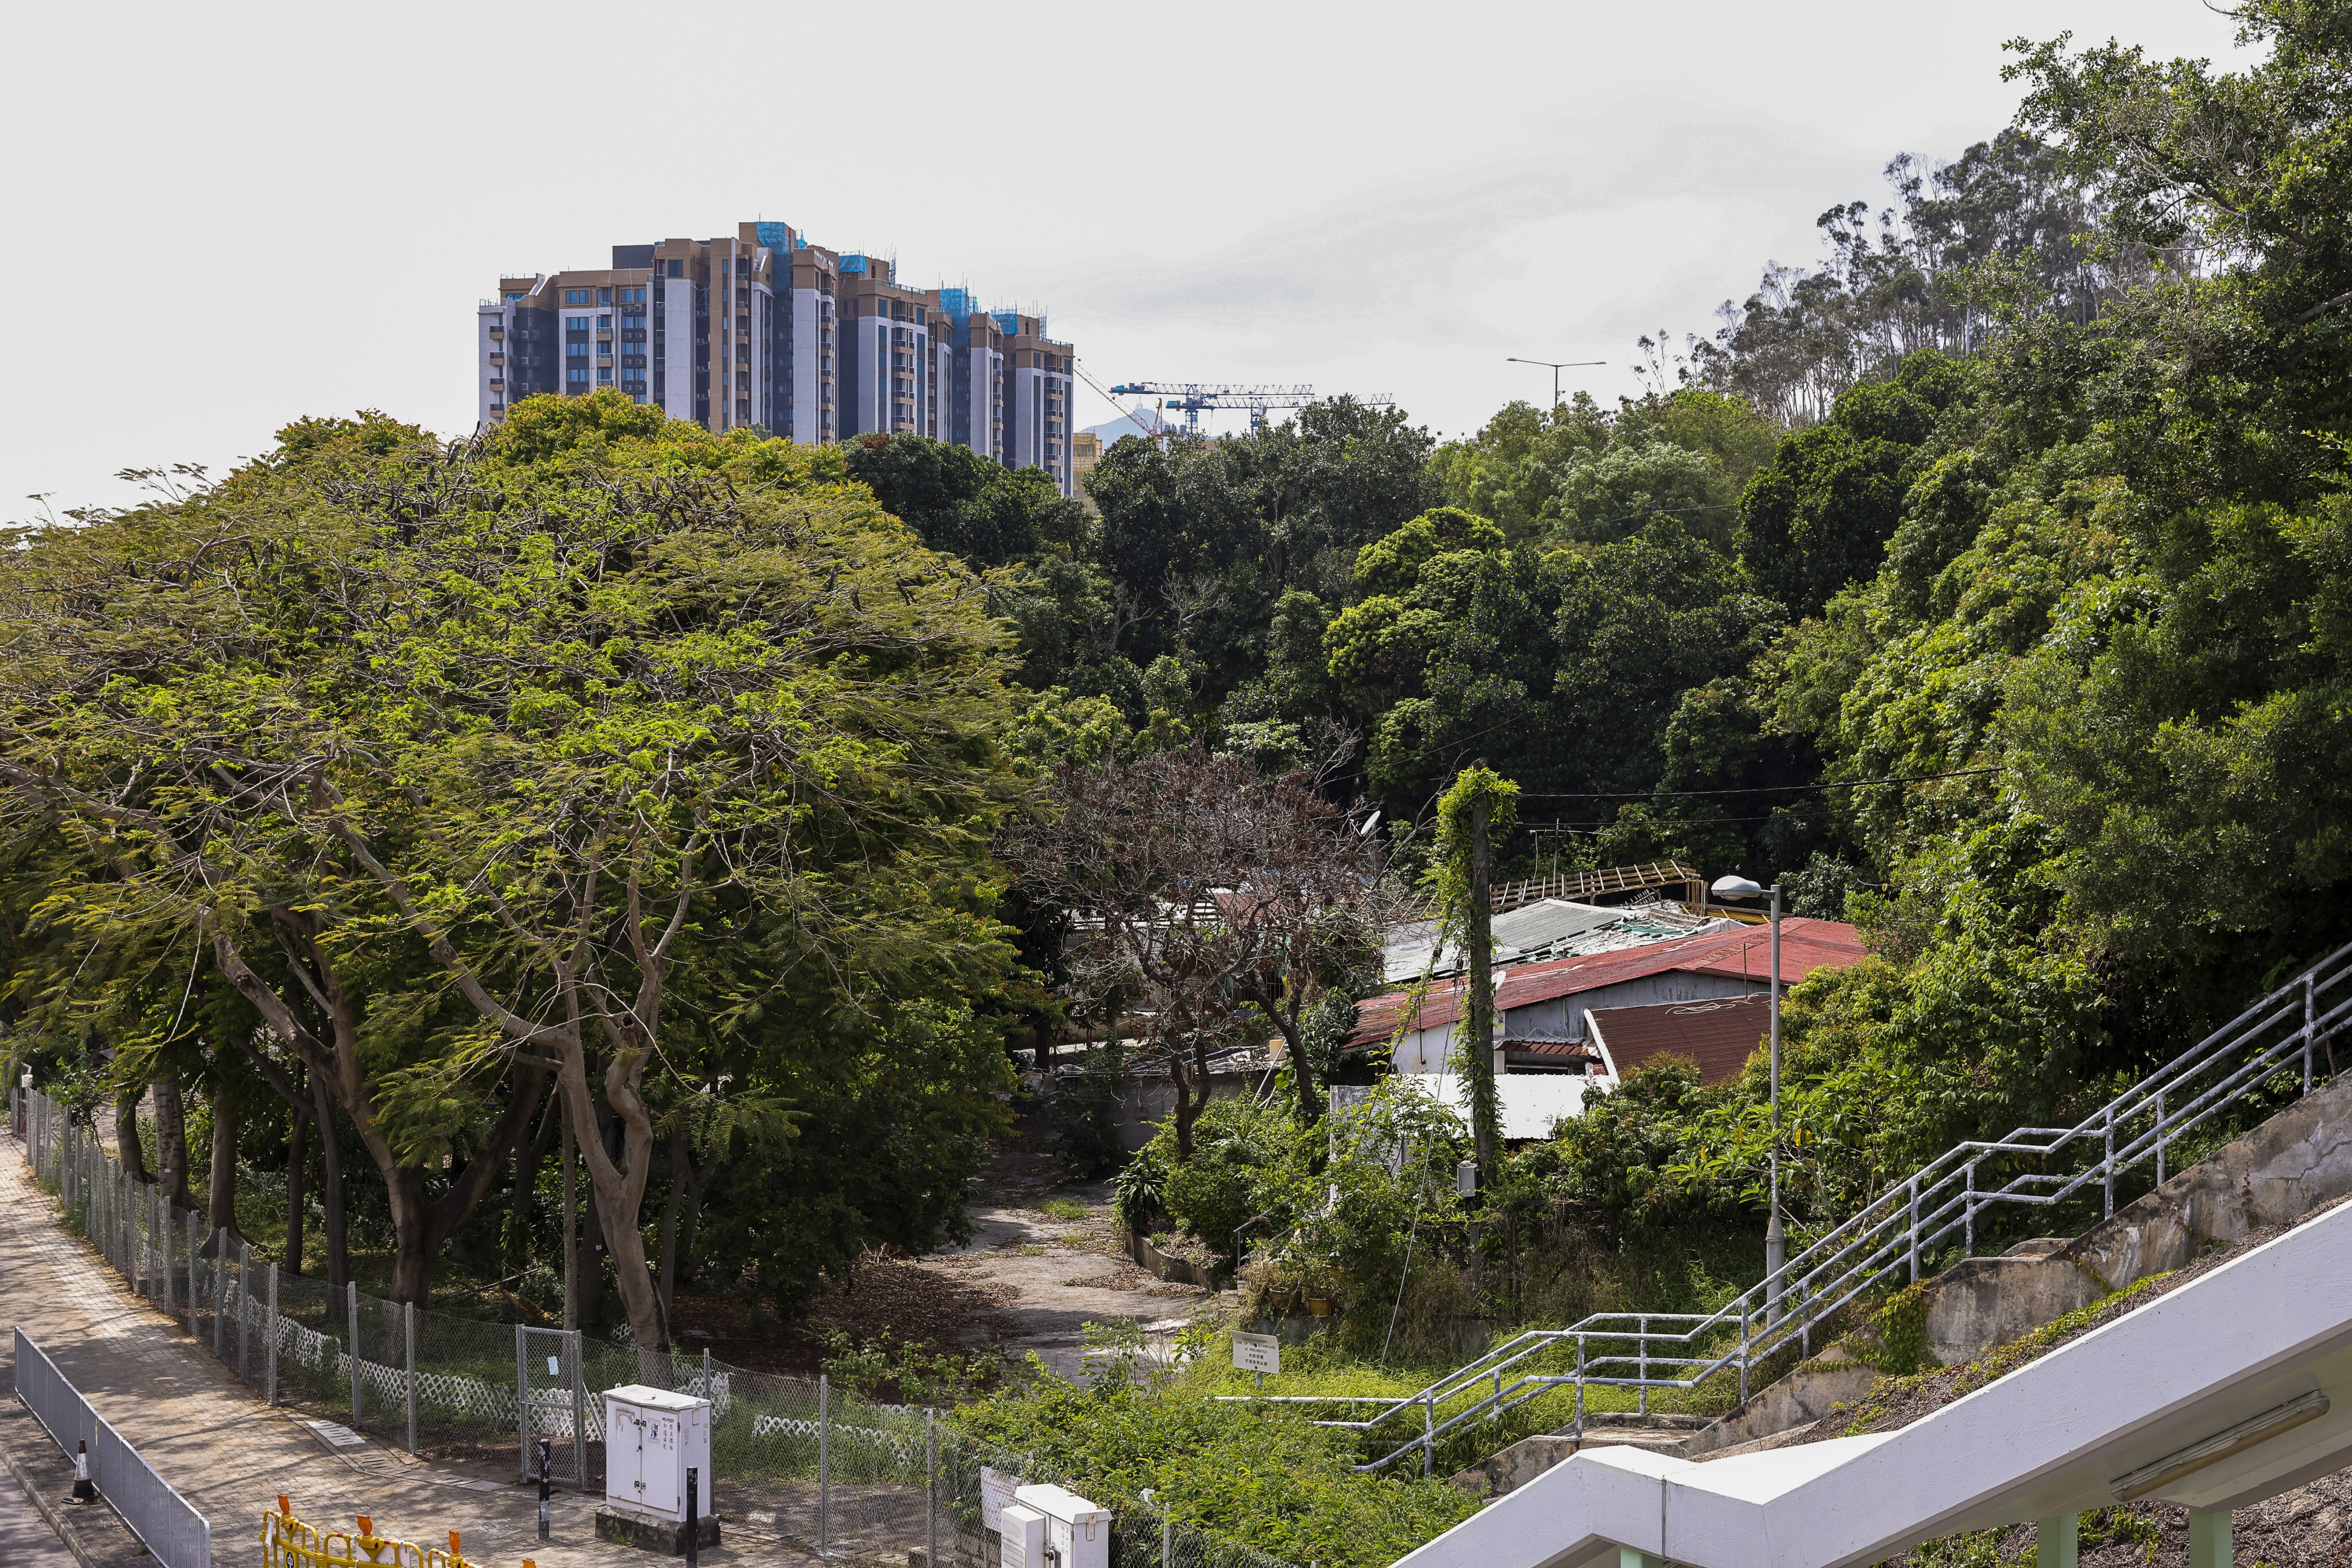 A leading developers’ association says the government’s rejection of bids for the Tuen Mun site is unrelated to Hong Kong’s minimum flat size requirement. Photo: K. Y. Cheng